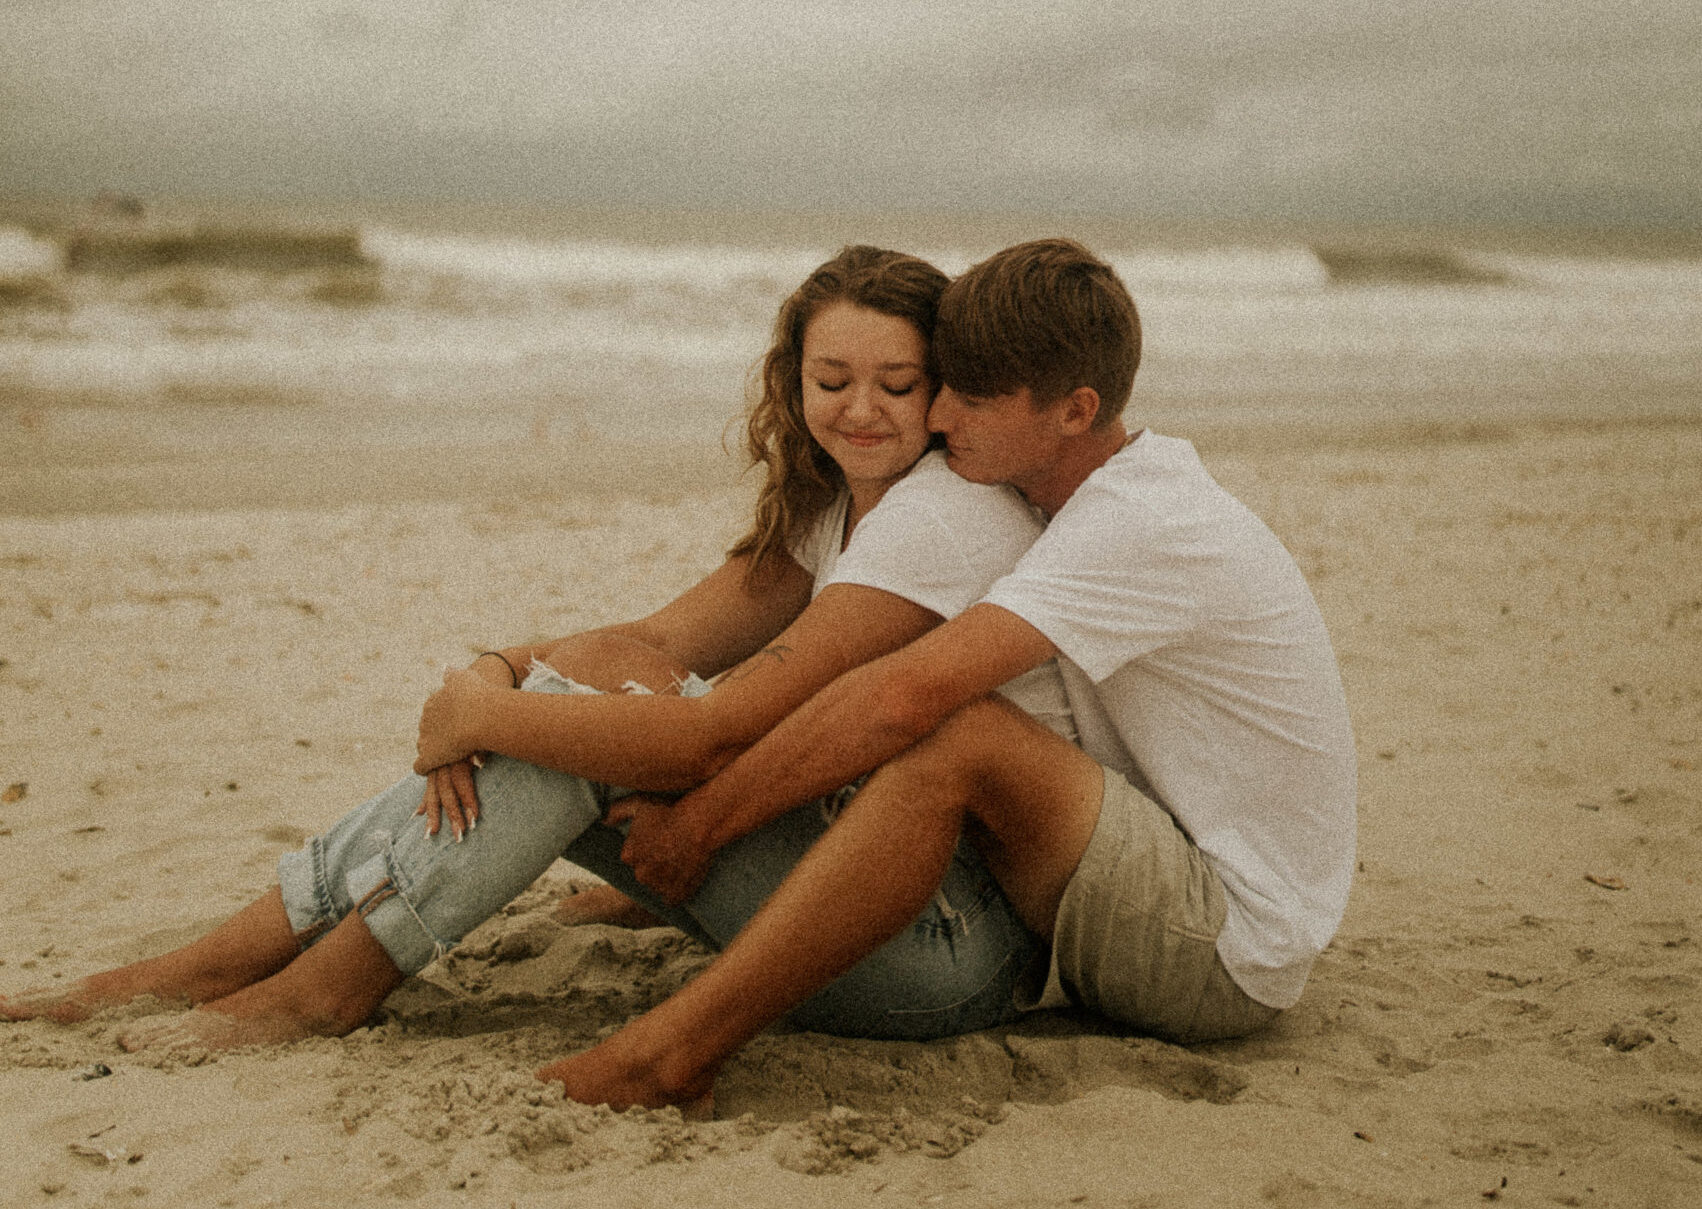 A couple at a florida beach for their engagement photoshoot